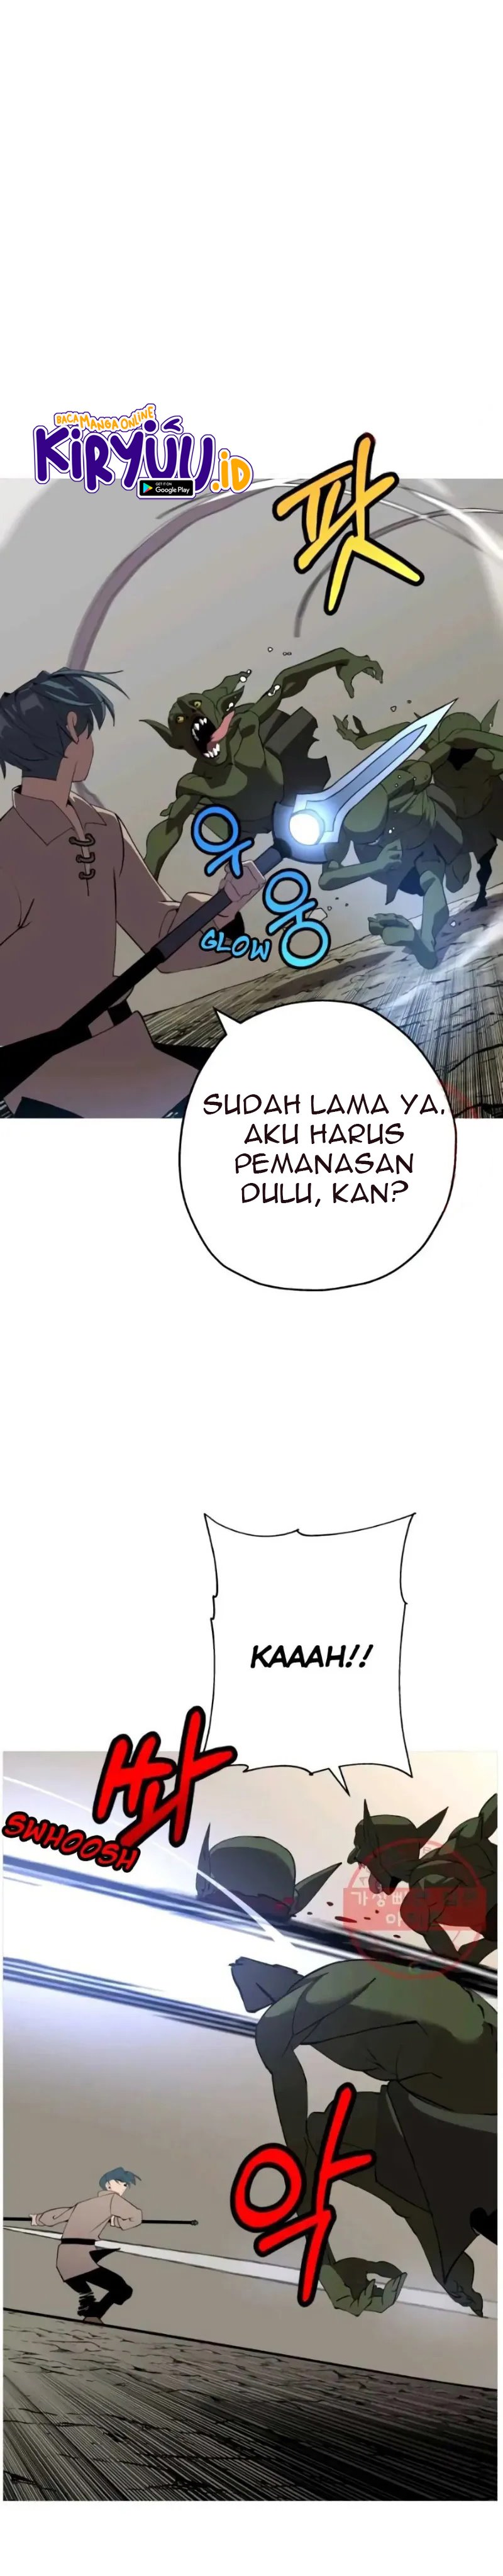 Dilarang COPAS - situs resmi www.mangacanblog.com - Komik the story of a low rank soldier becoming a monarch 058 - chapter 58 59 Indonesia the story of a low rank soldier becoming a monarch 058 - chapter 58 Terbaru 37|Baca Manga Komik Indonesia|Mangacan